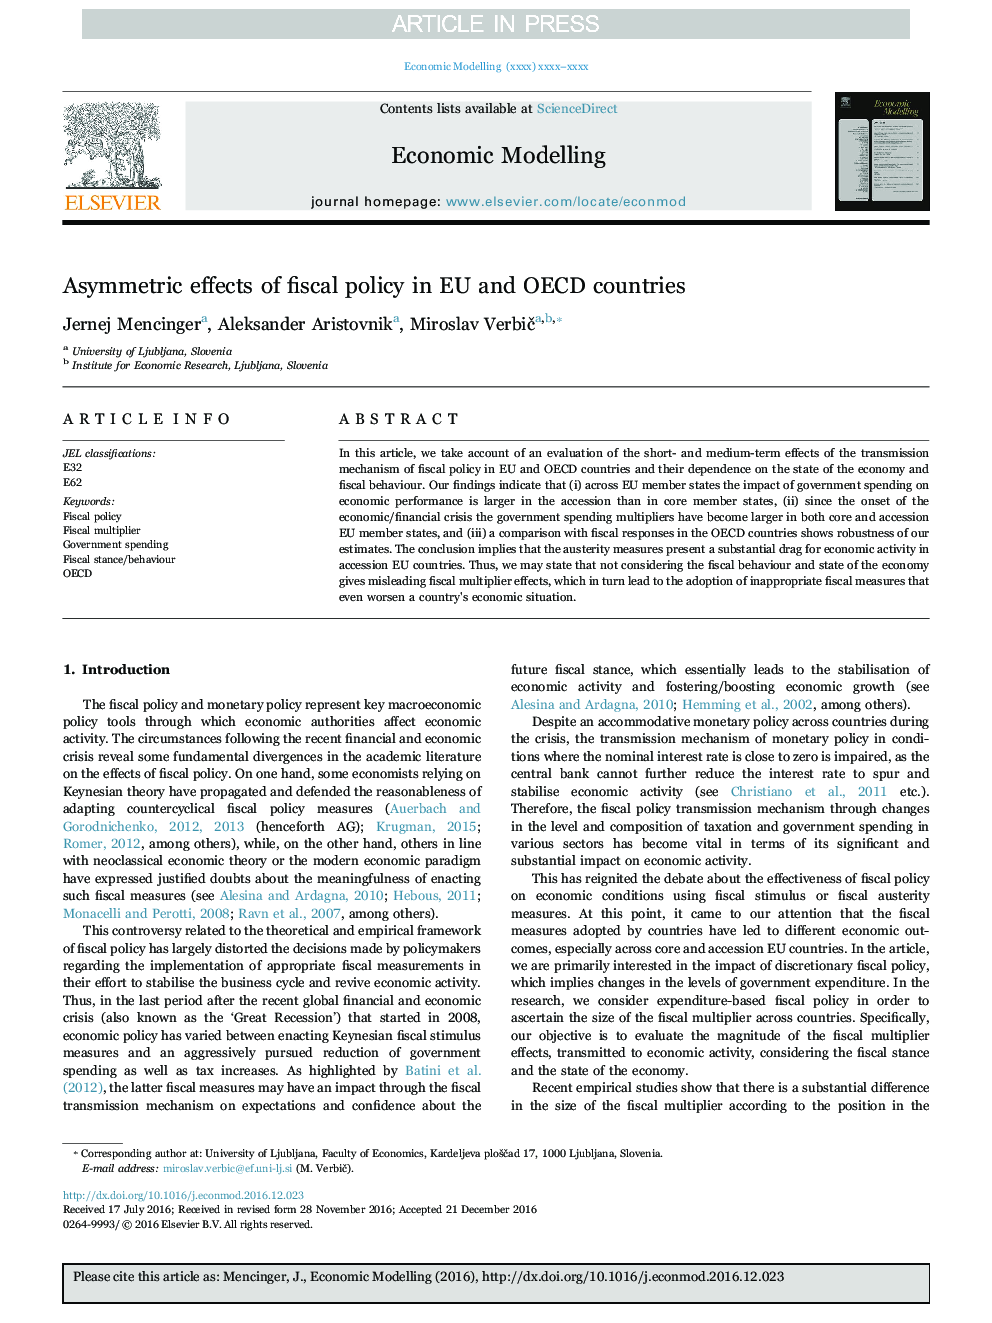 Asymmetric effects of fiscal policy in EU and OECD countries